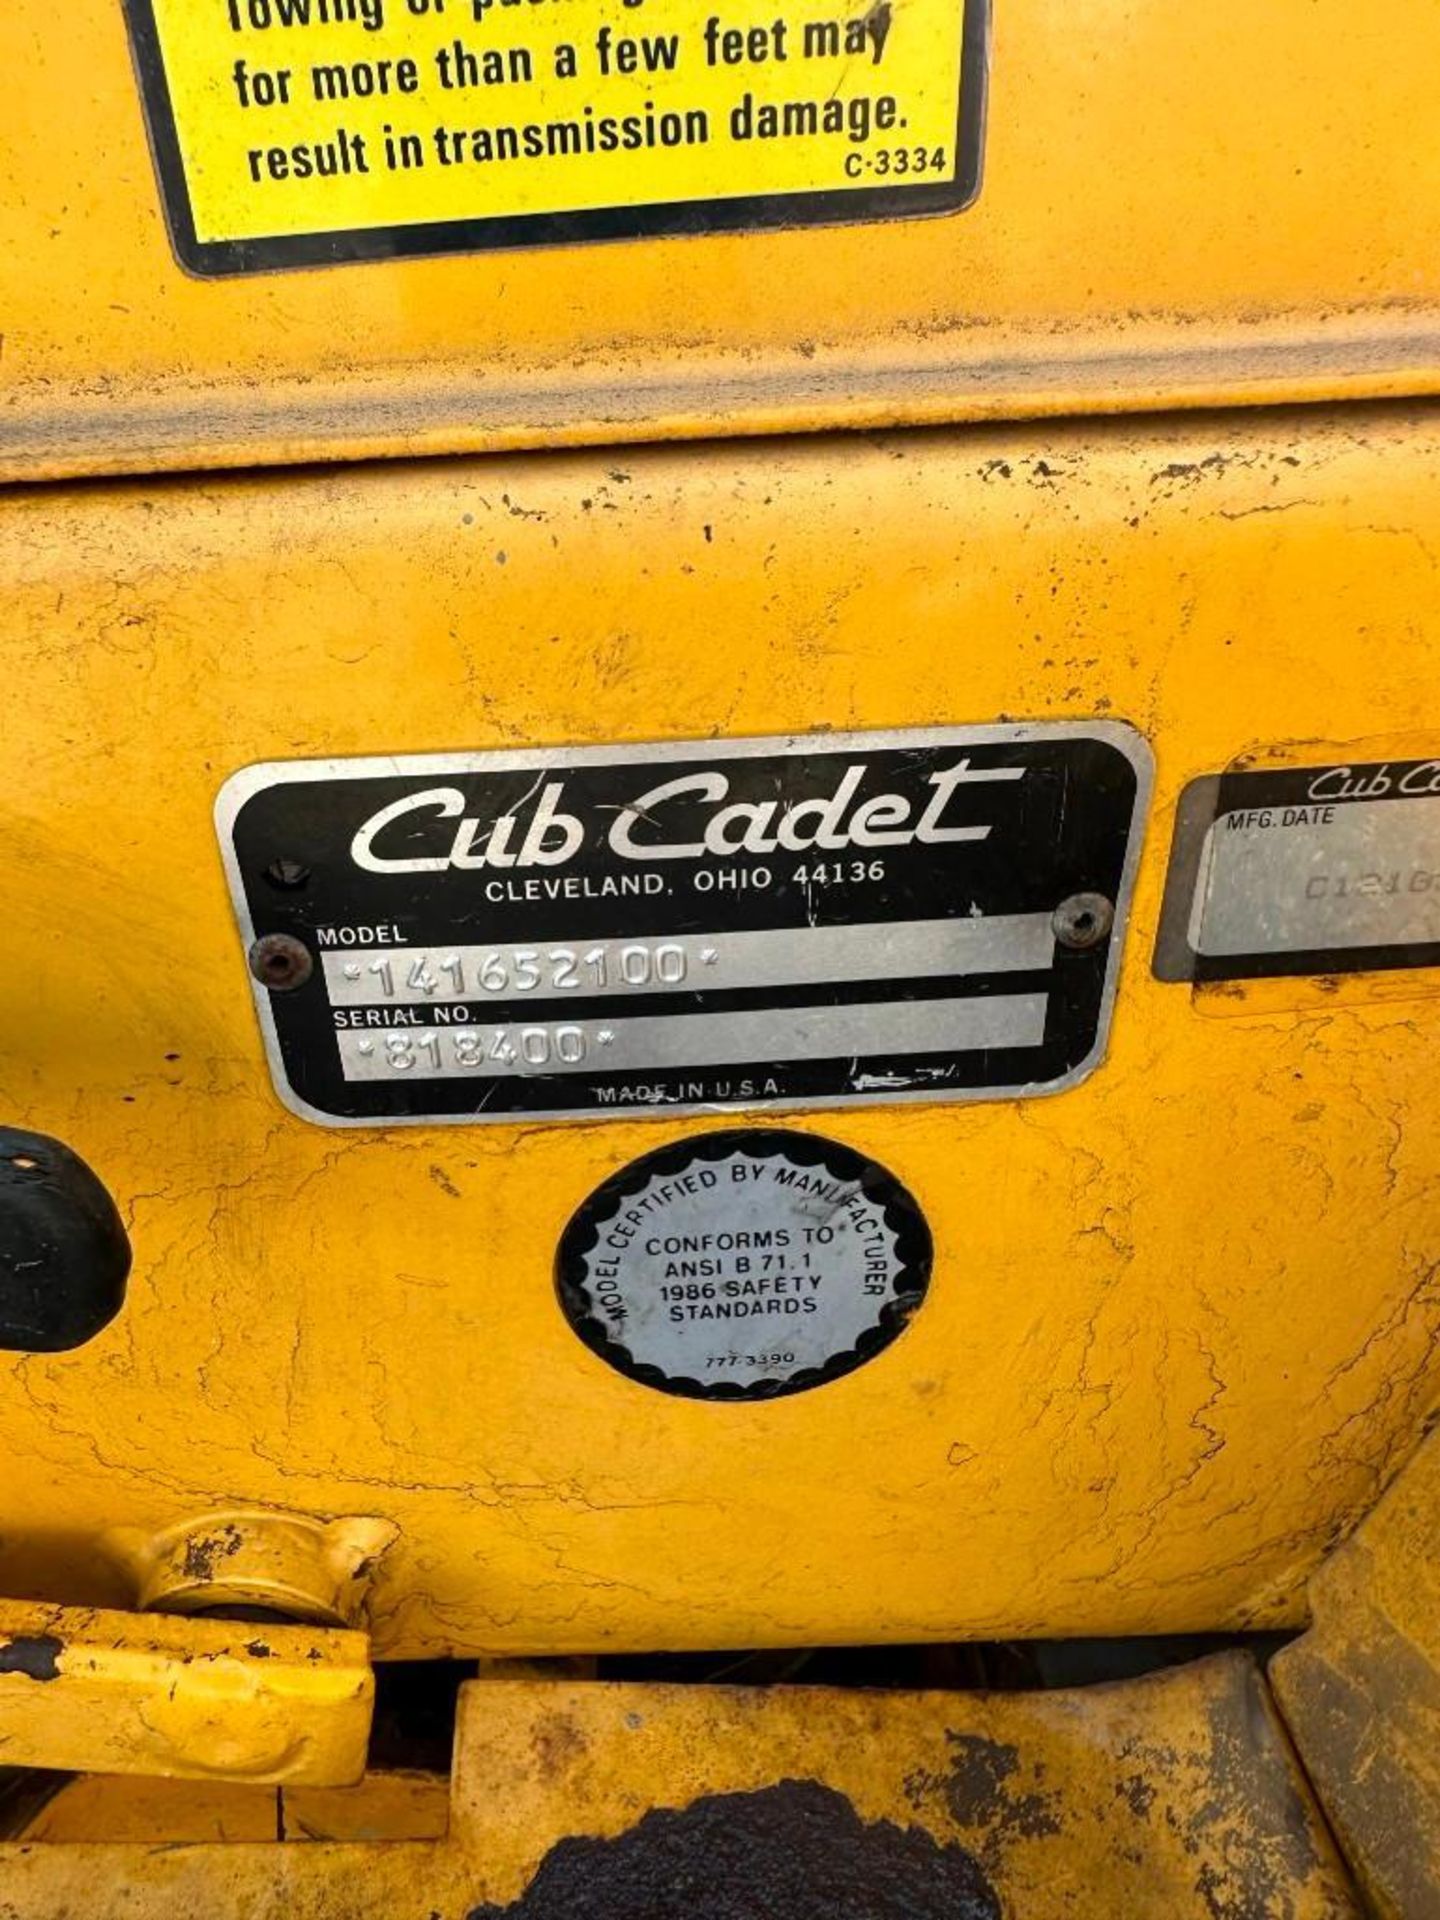 Cub Cadet lawn mower with 46" deck, runs and operates - Image 5 of 6